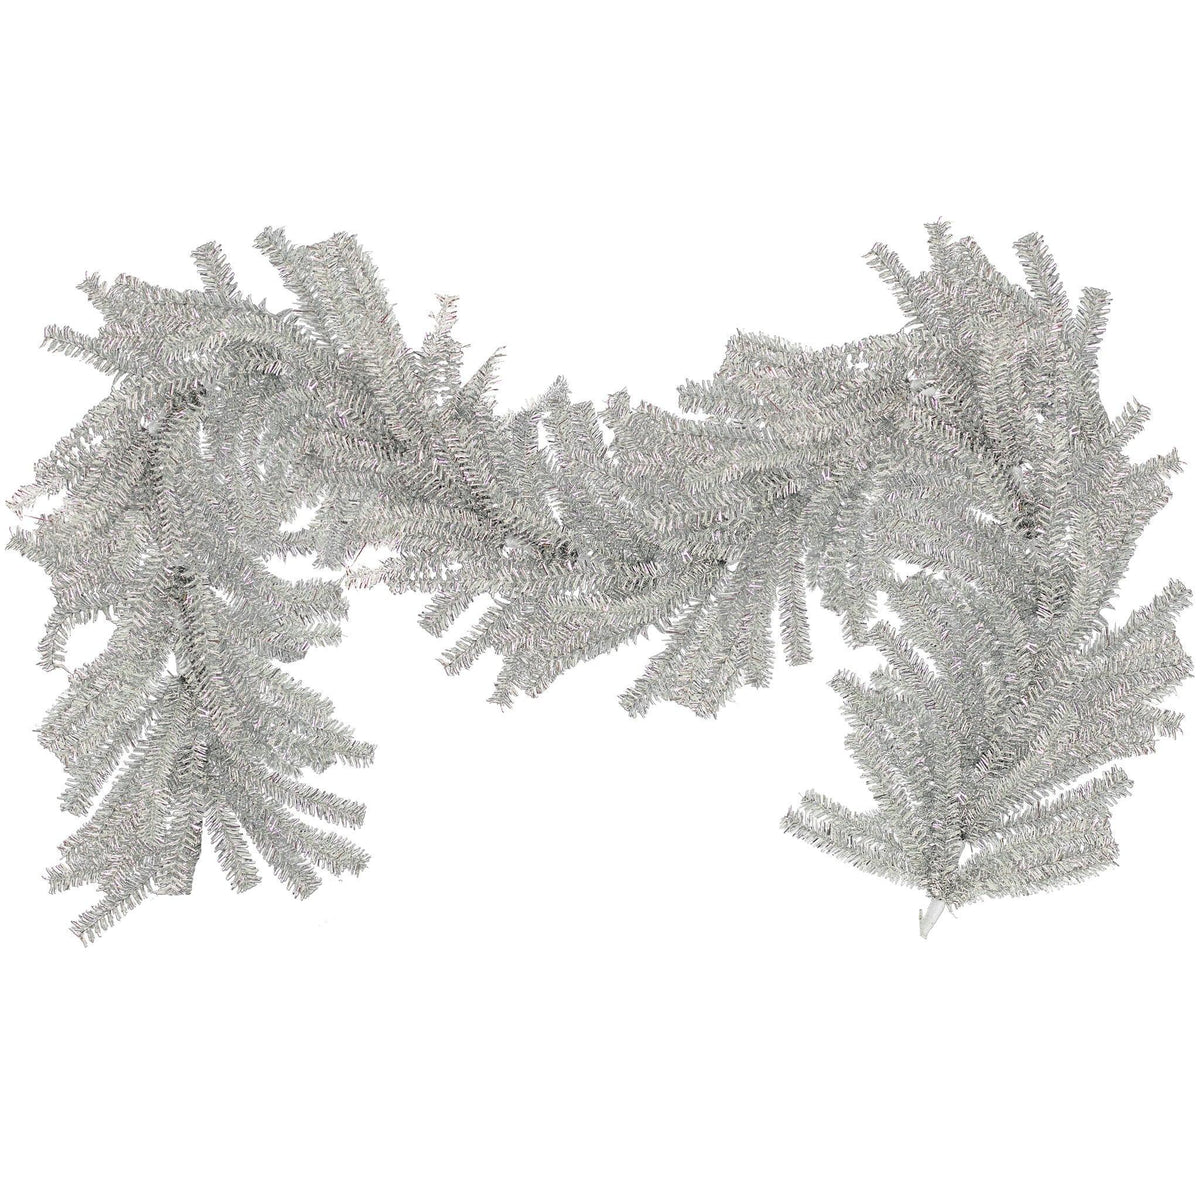 Shop for Lee Display's brand new 6FT Silver 1in Tinsel Brush Garlands on sale at leedisplay.com.  